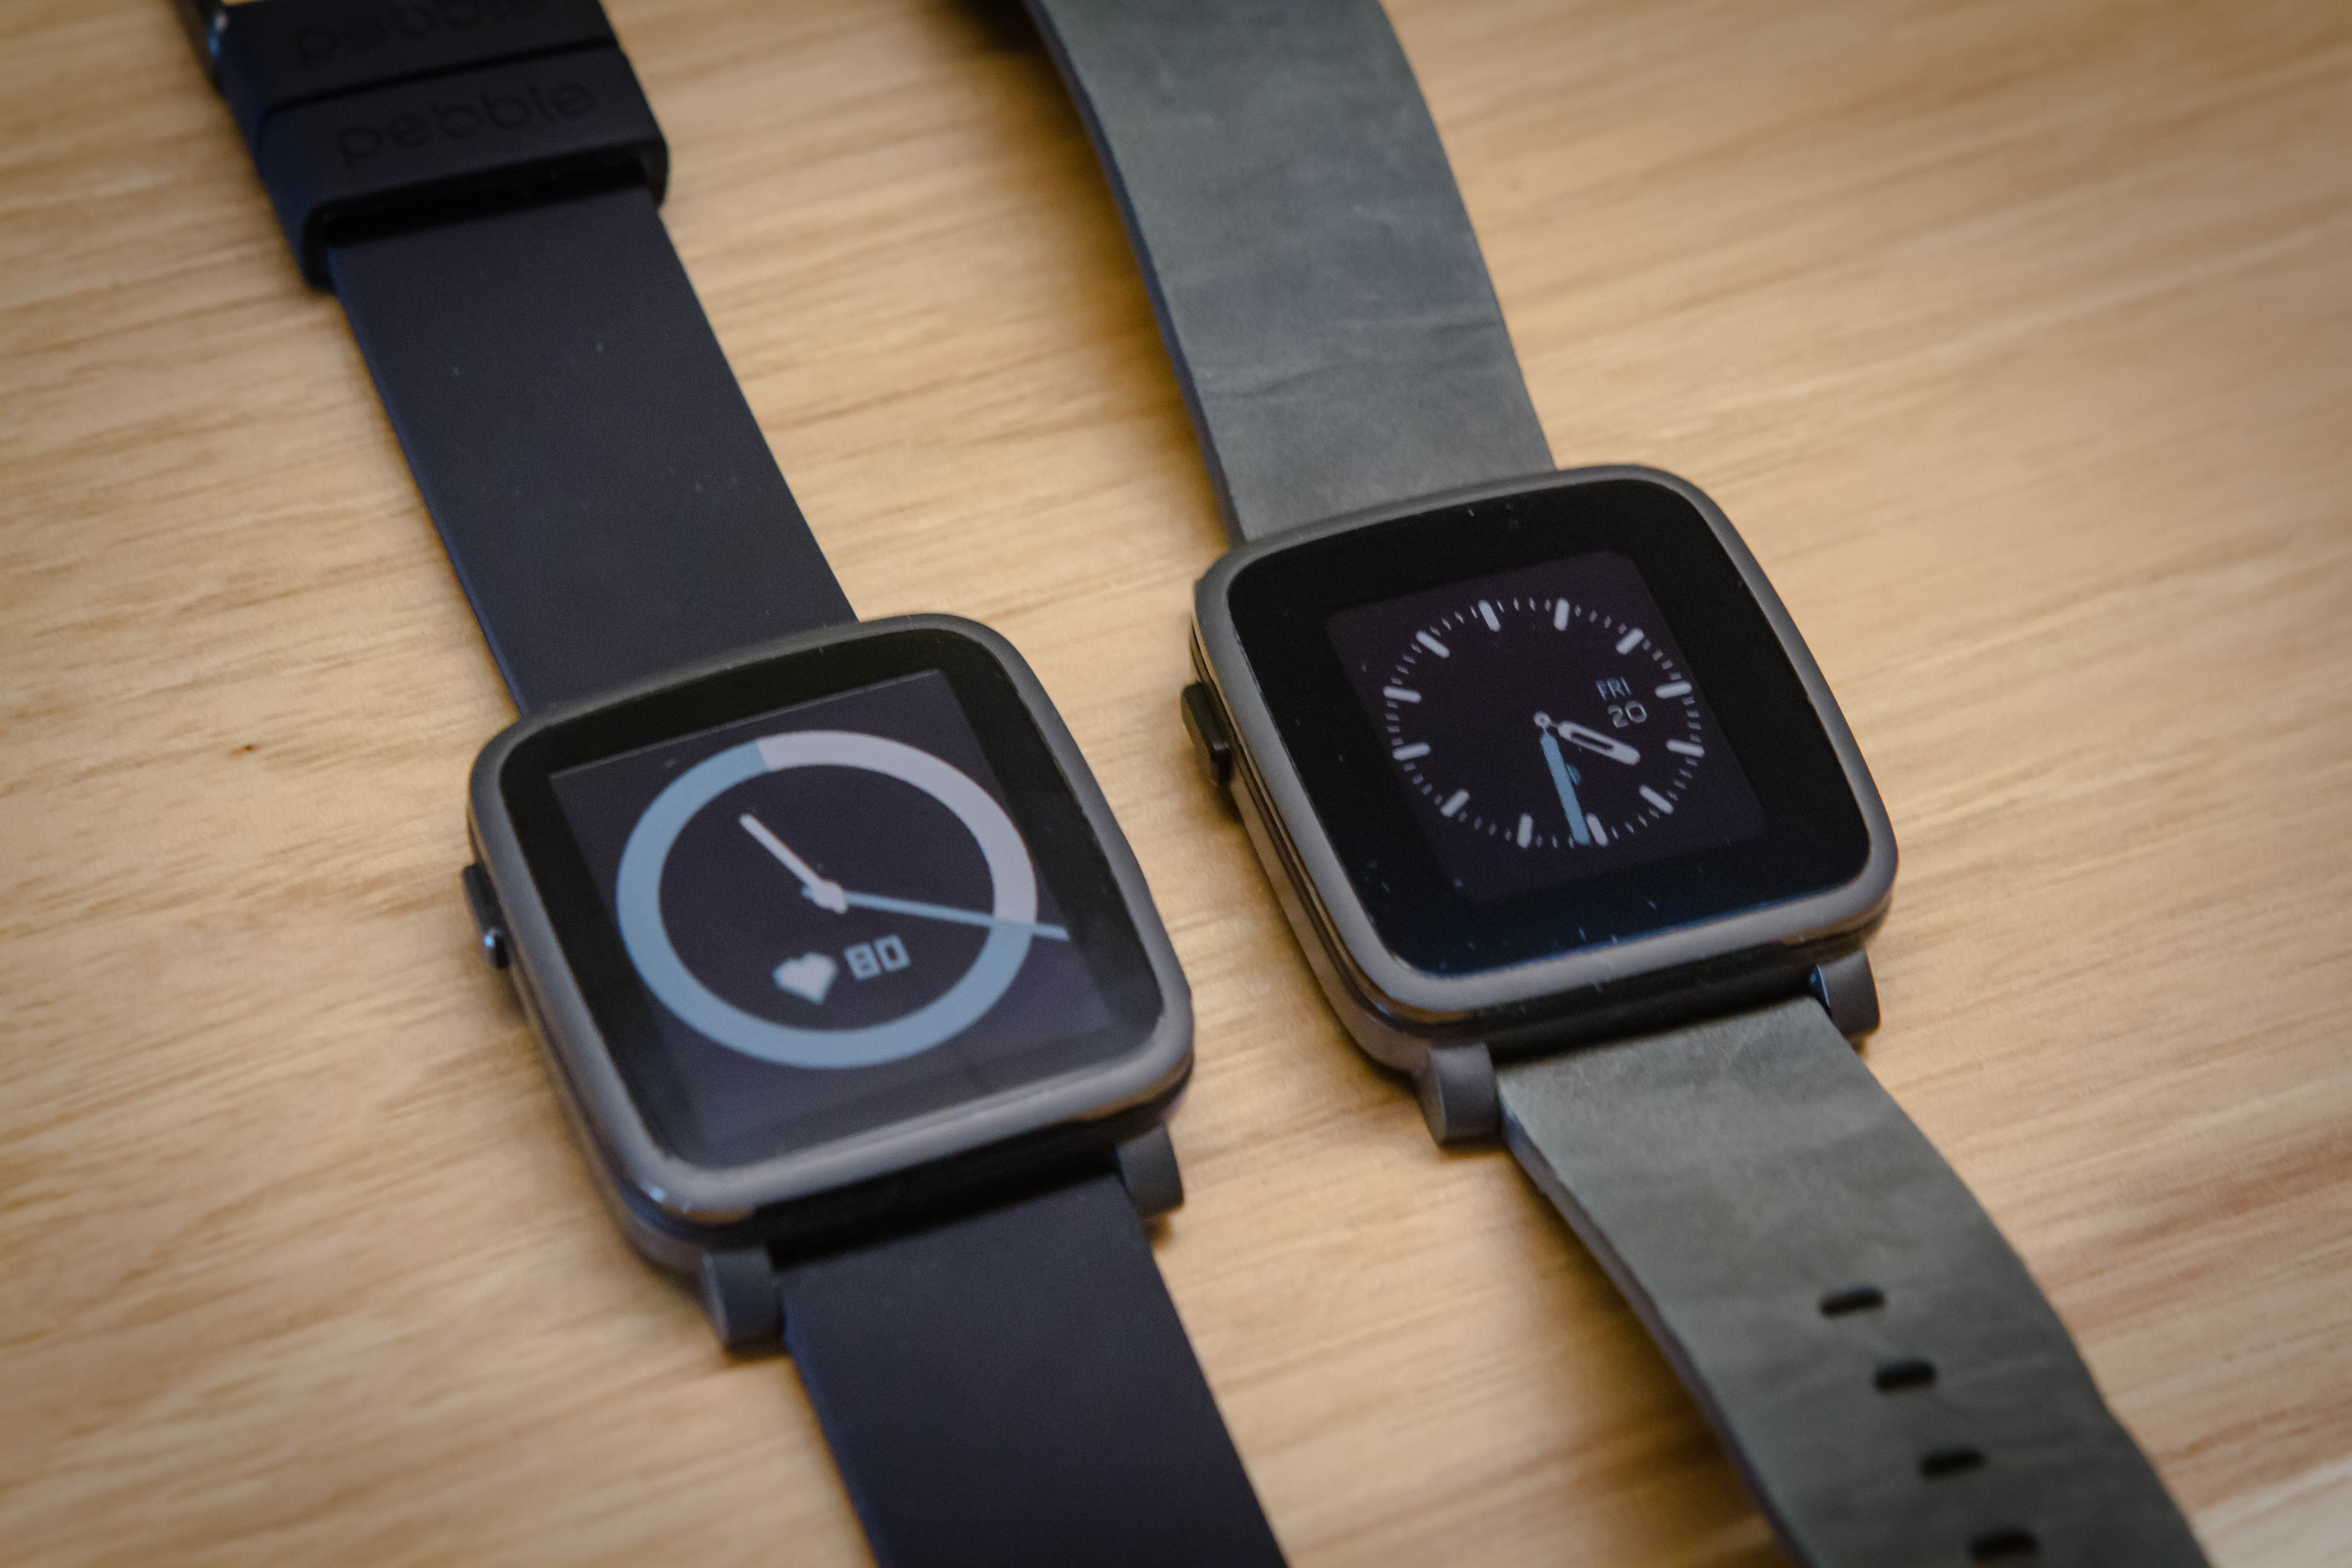 Left: Pebble Time 2, Right: old Pebble Time